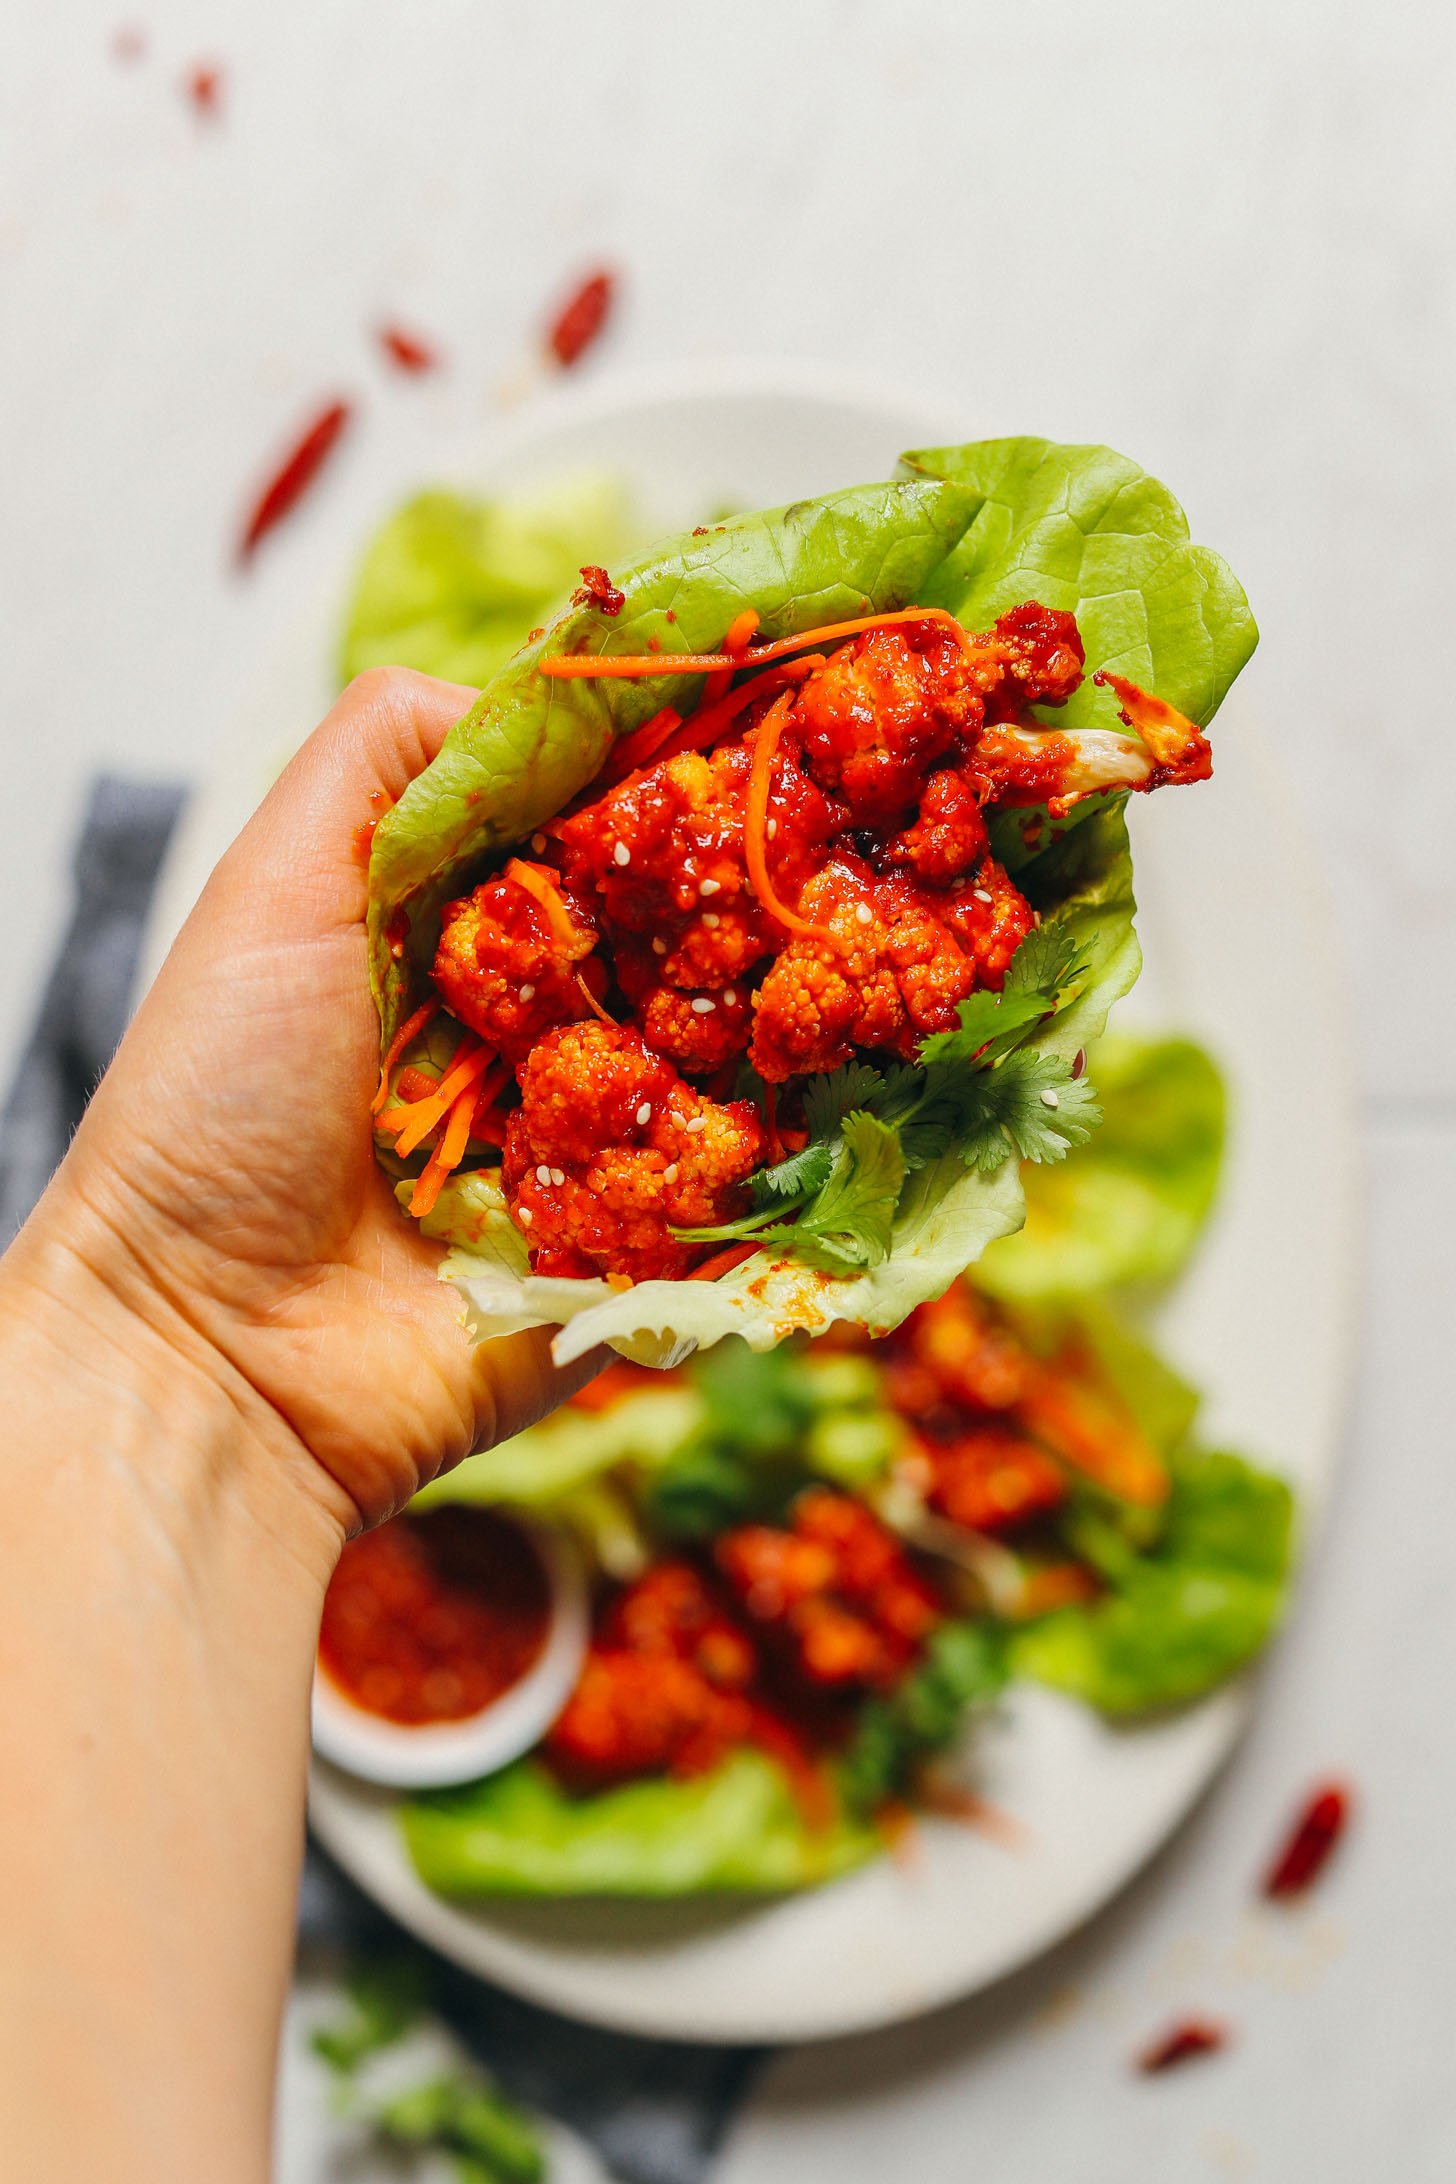 Holding a lettuce leaf stuffed with gluten-free and vegan Korean-Spiced Cauliflower Wings